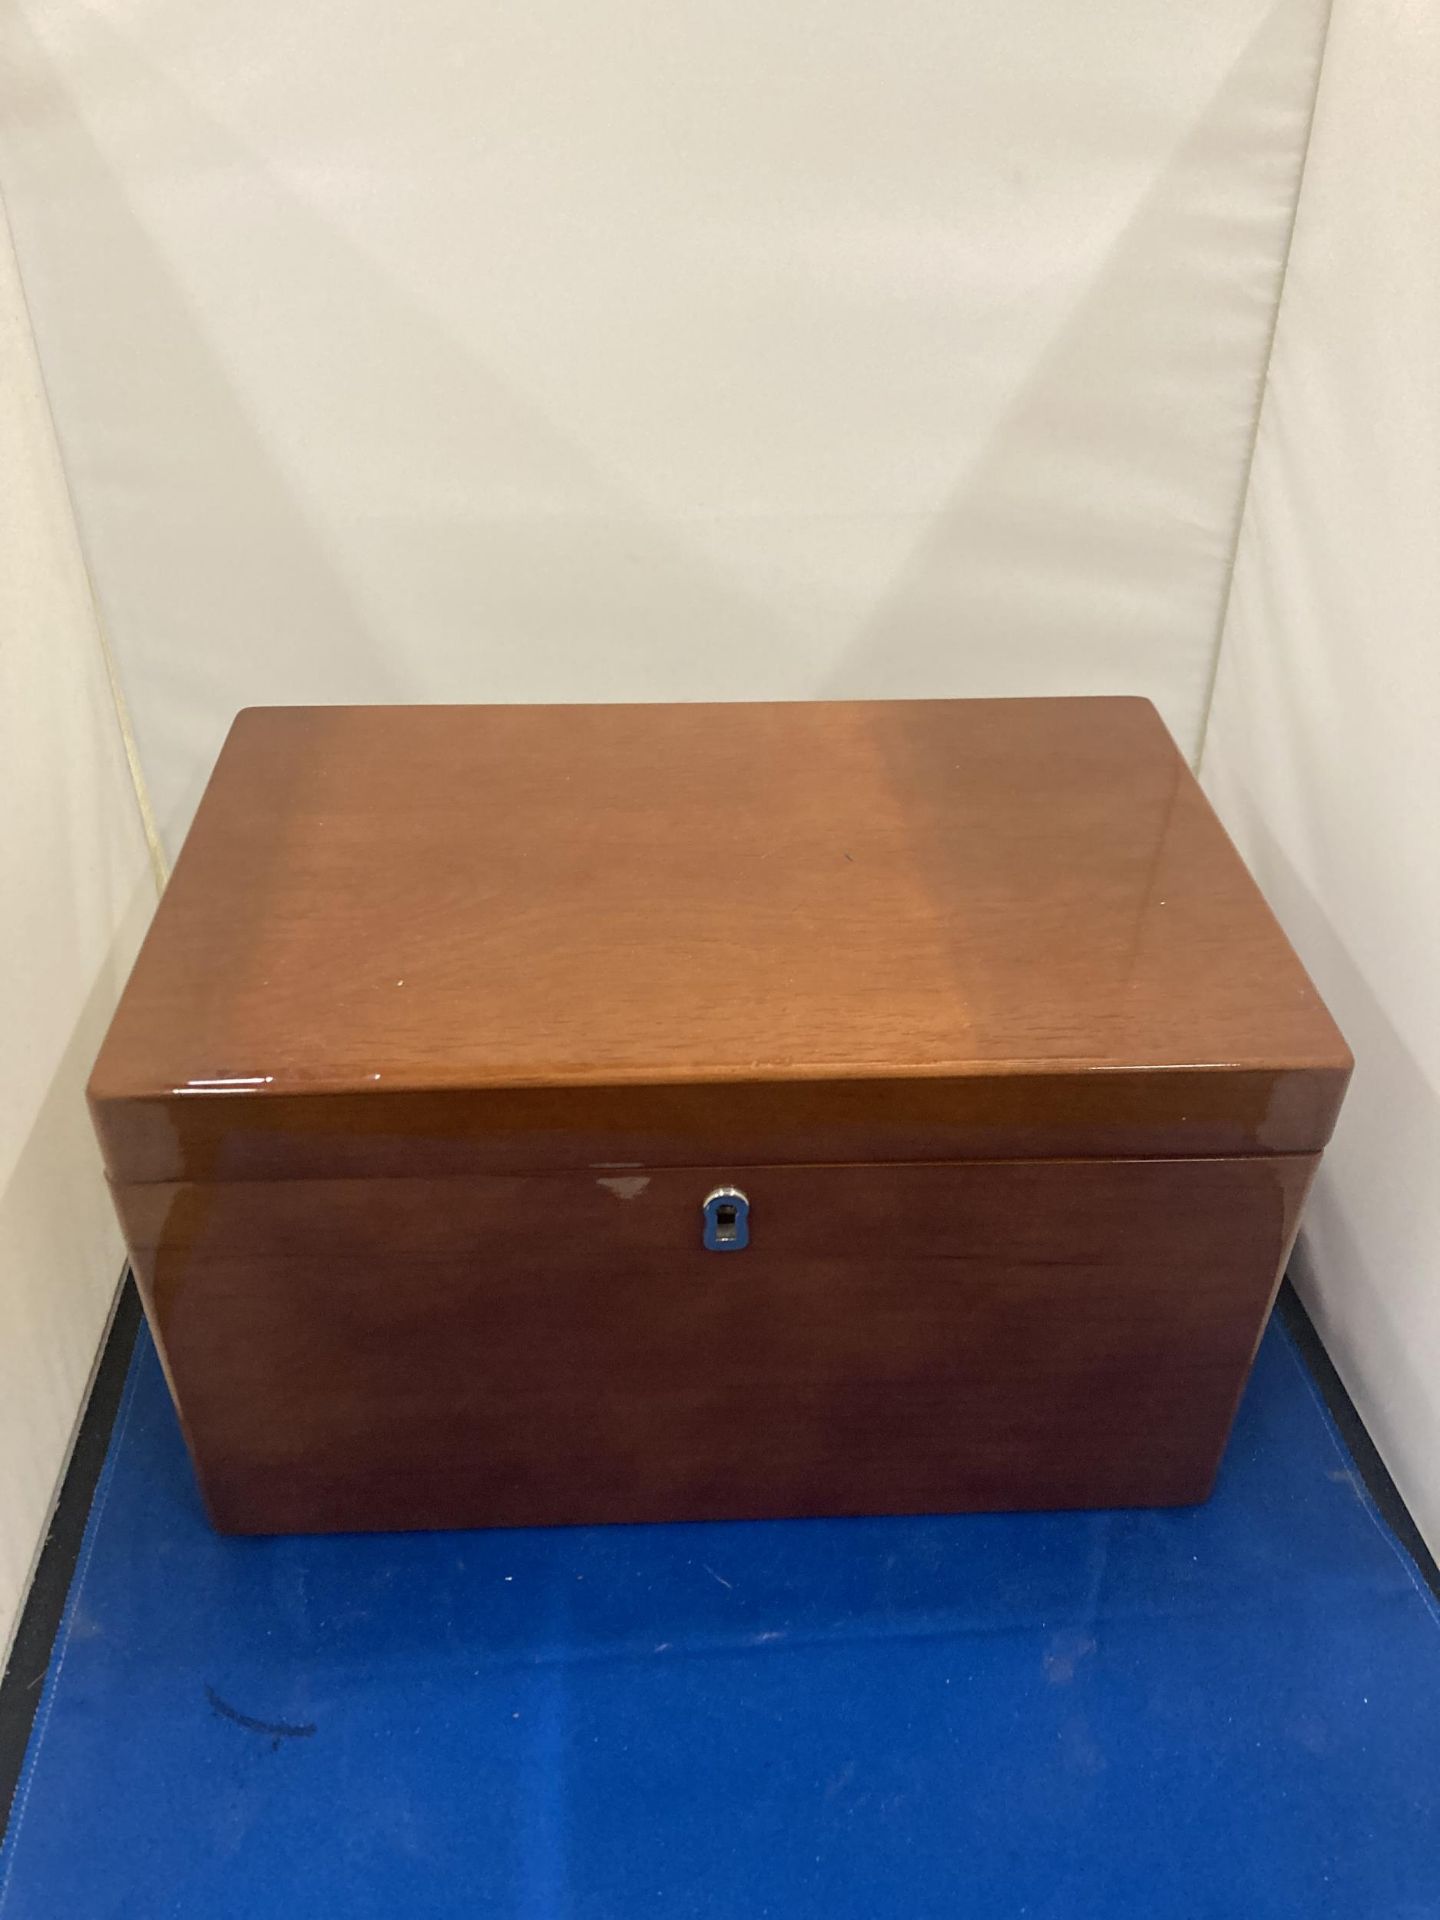 A JEWELLERY BOX WITH LIFT UP MIRROR LID AND TWO INNER TRAYS - Image 4 of 4